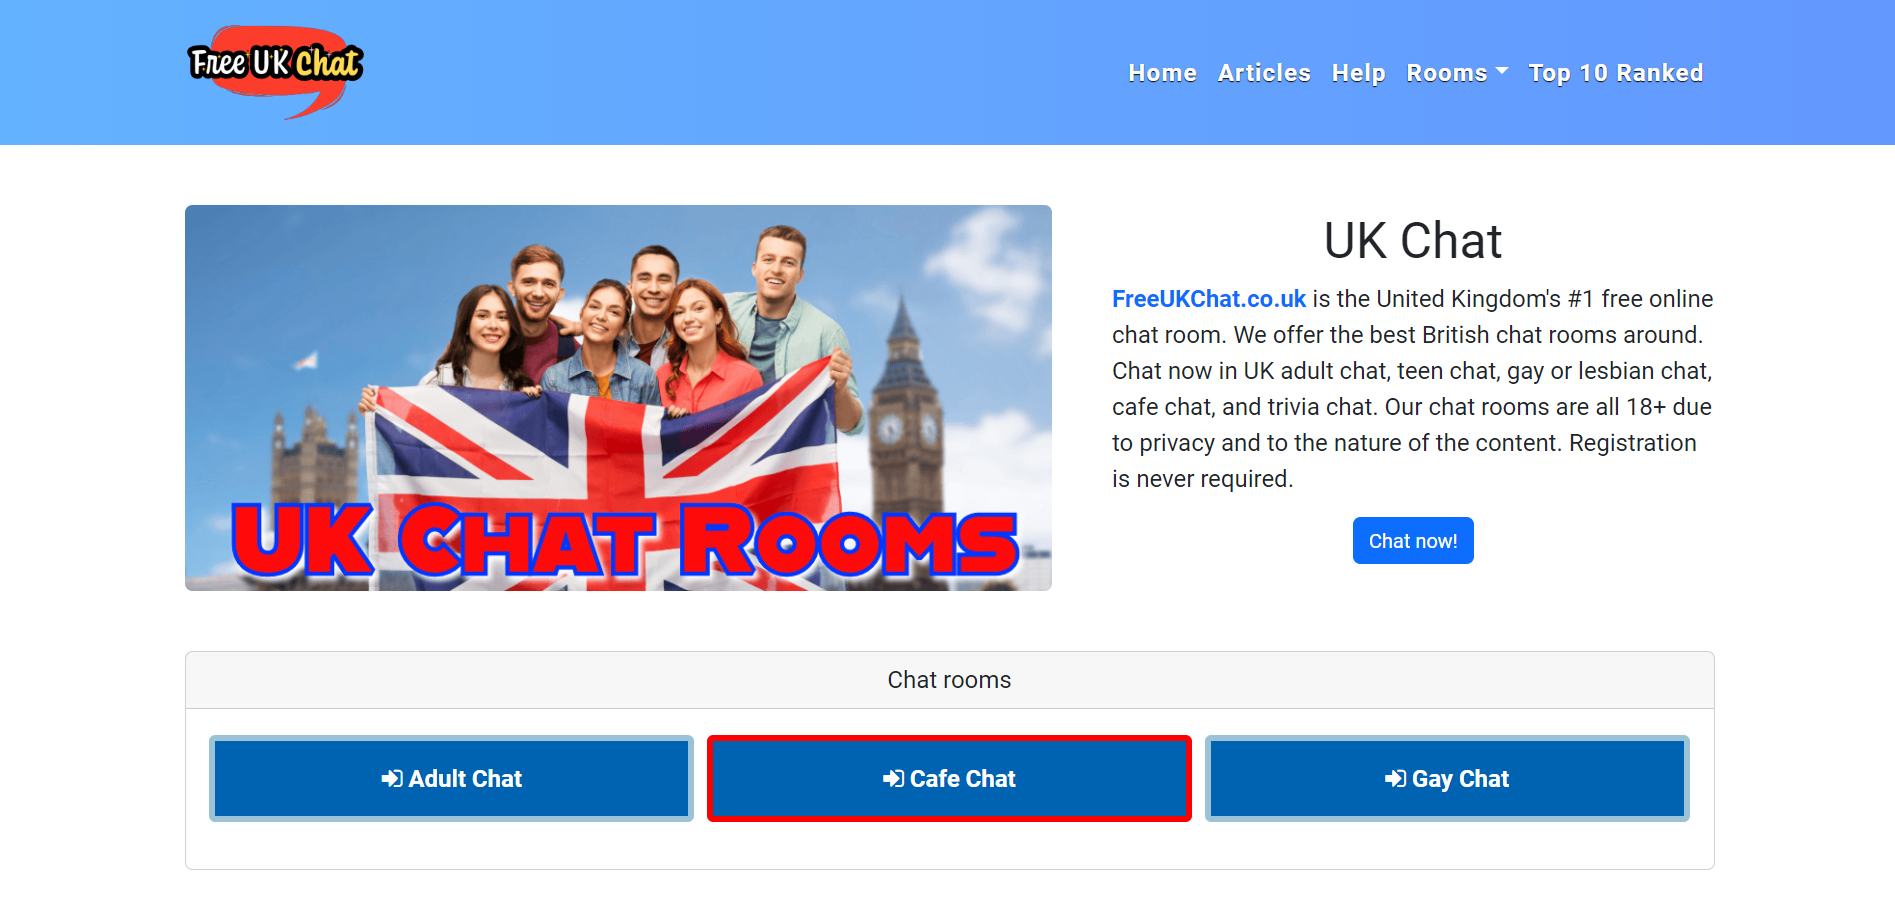 Free UK chat rooms for people living in the United Kingdom